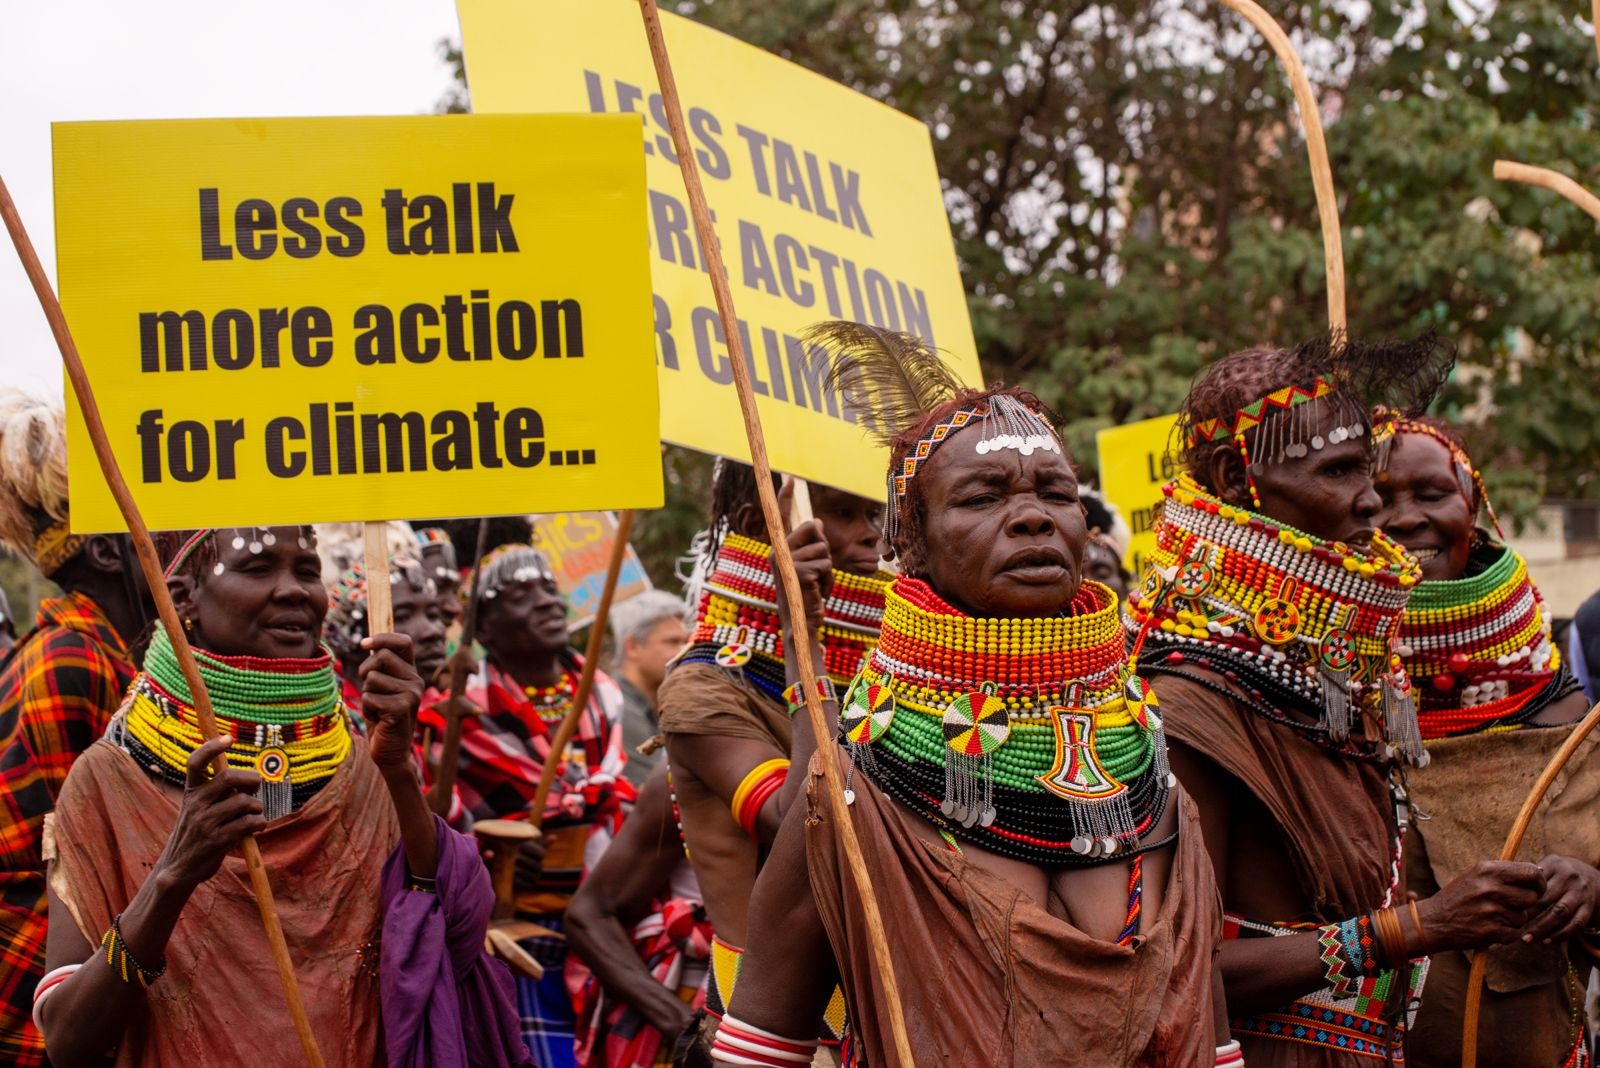 A crowd of indigenous Africans dressed with red, yellow and green collars and face markings. They are holding long sticks and yellow banners reading "less talk more action for climate..."